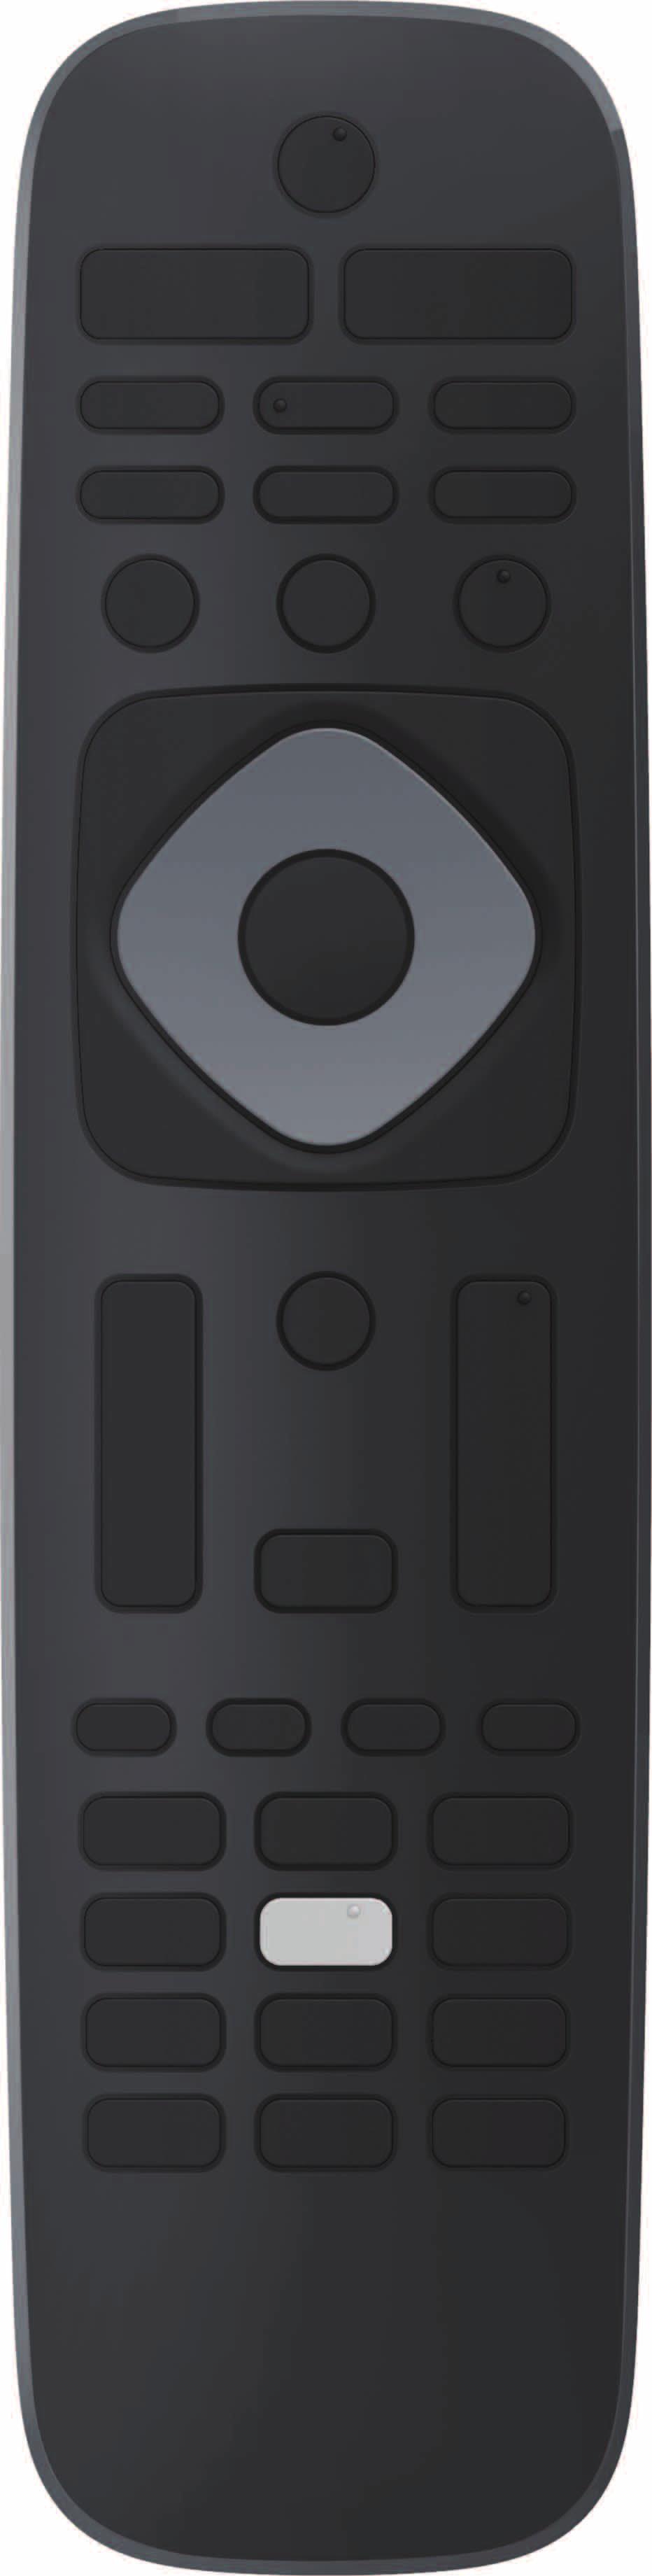 Remote control u t s r q p o a b c d e f g h i j k l m n (POWER) Turns the TV on from standby or off to standby. VUDU Access directly to VUDU.